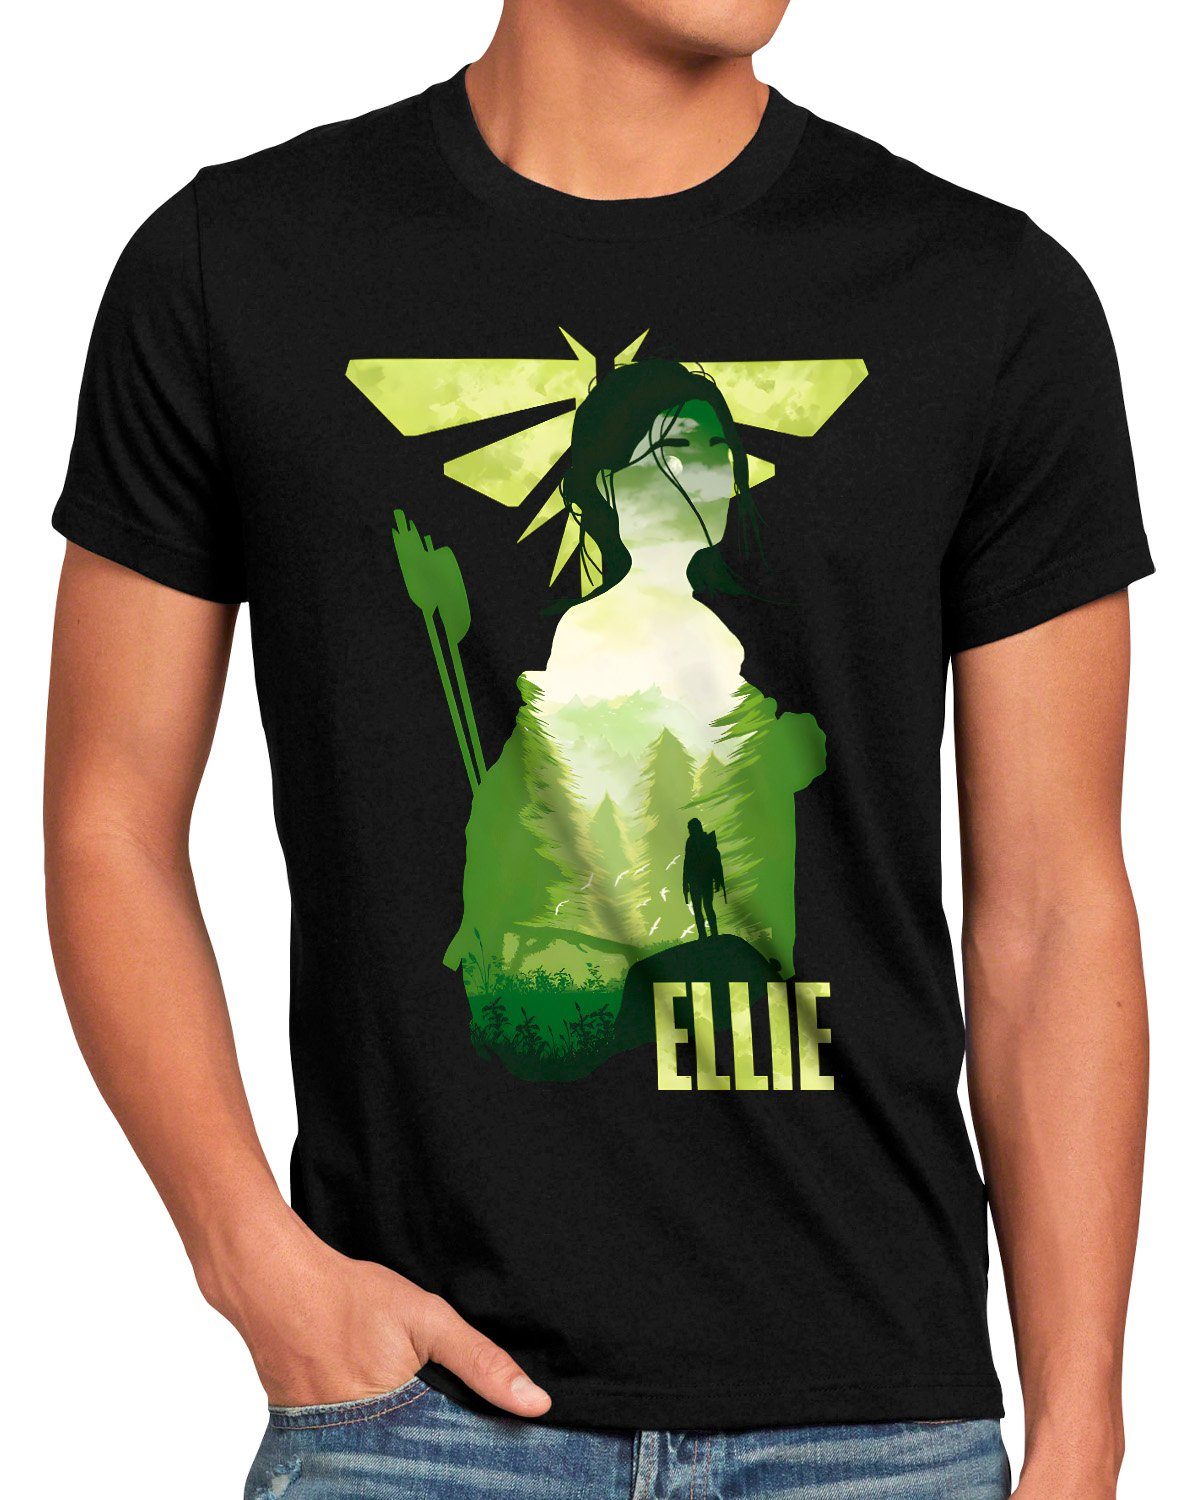 tv the style3 T-Shirt ps5 of Herren ps4 for videospiel last Cure us Print-Shirt Ellie